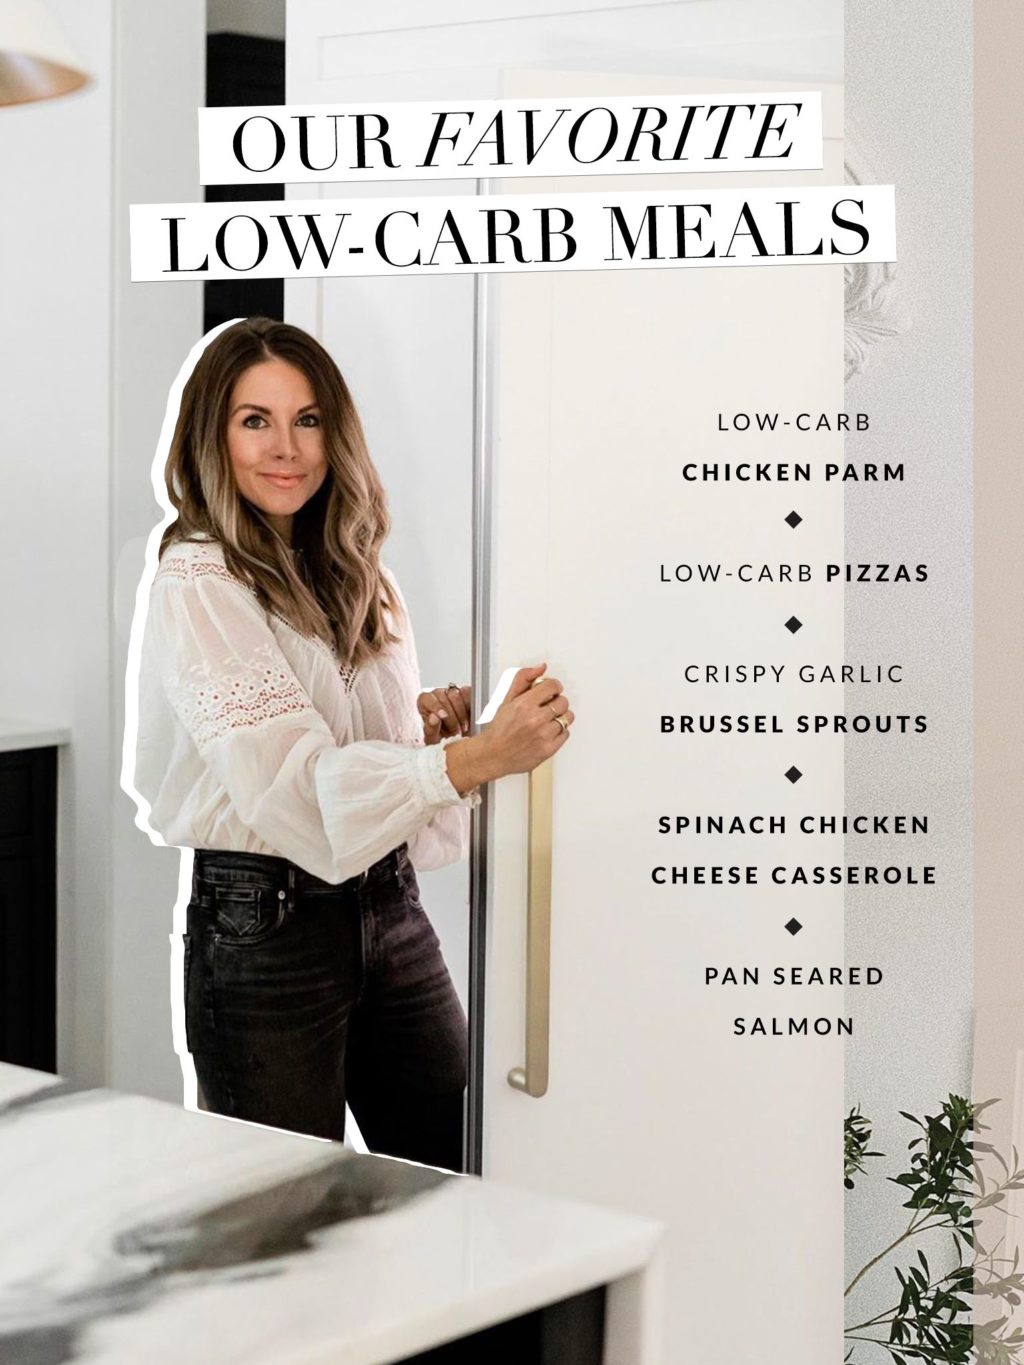 Our Favorite Low-Carb Meals